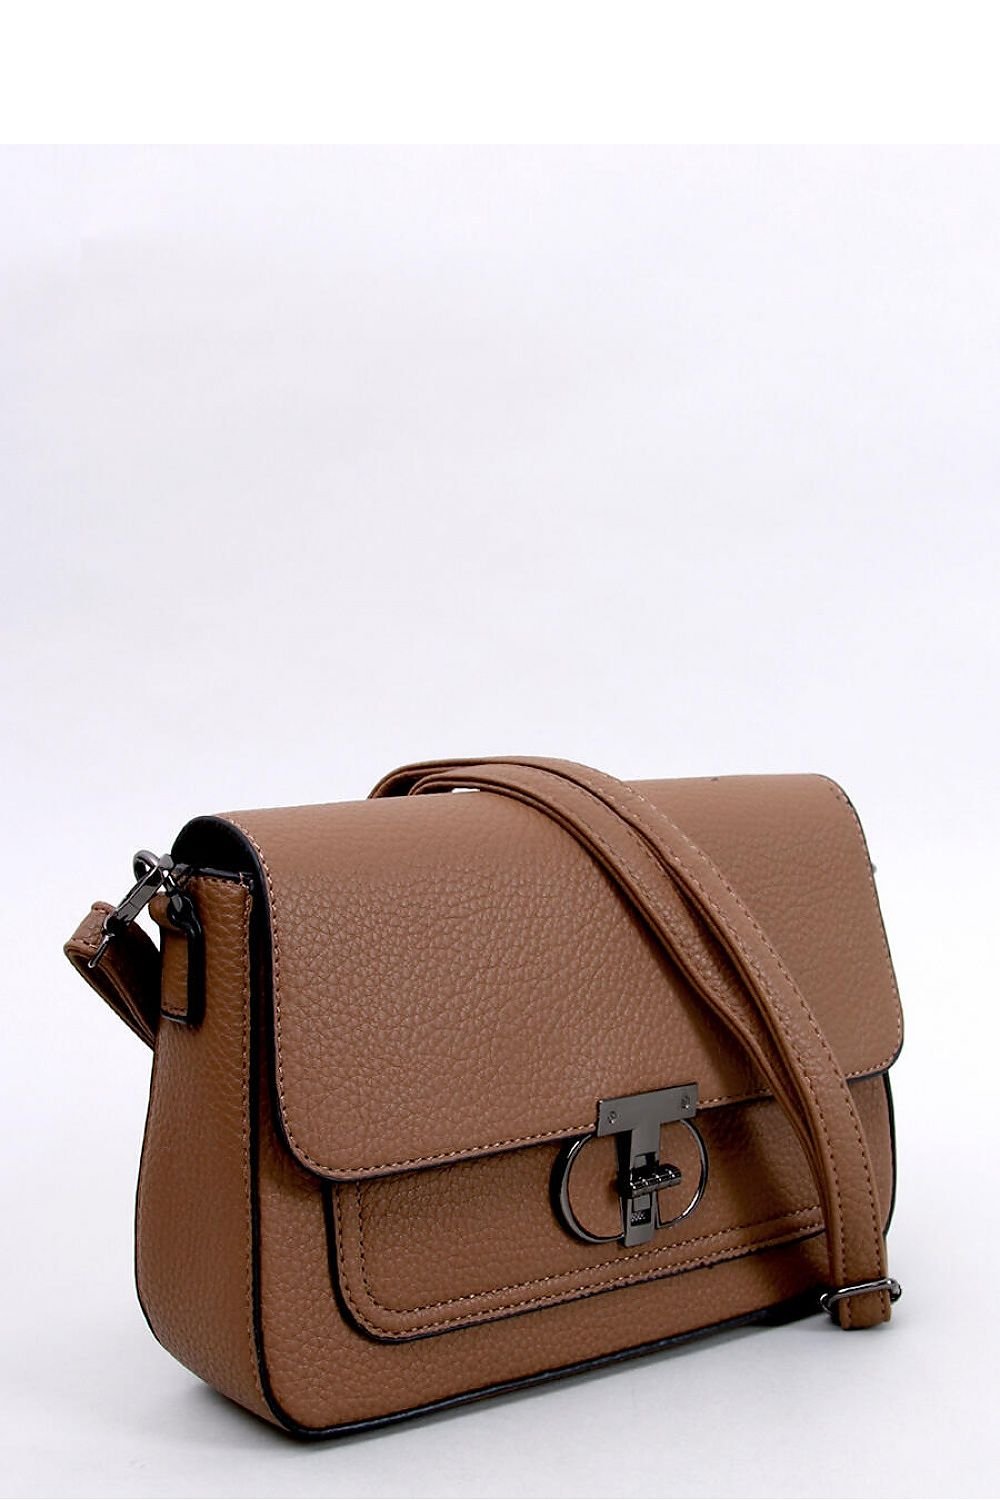 Beige messenger bag stylish clasp with a flap